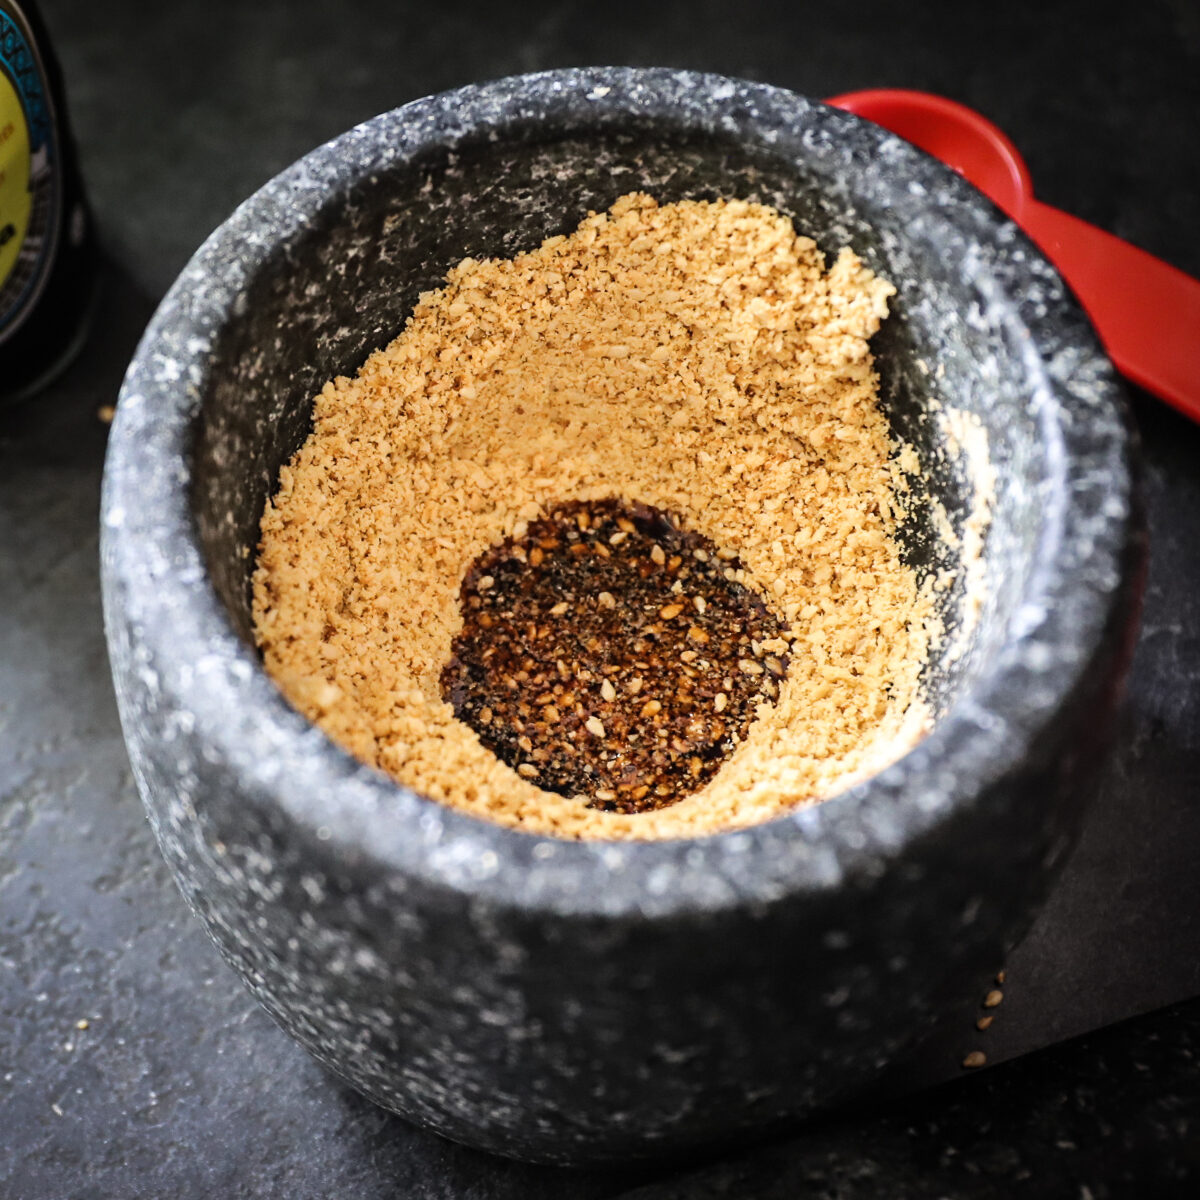 Dark brown soy sauce has been added to the center of the ground sesame seeds but not yet stirred in.